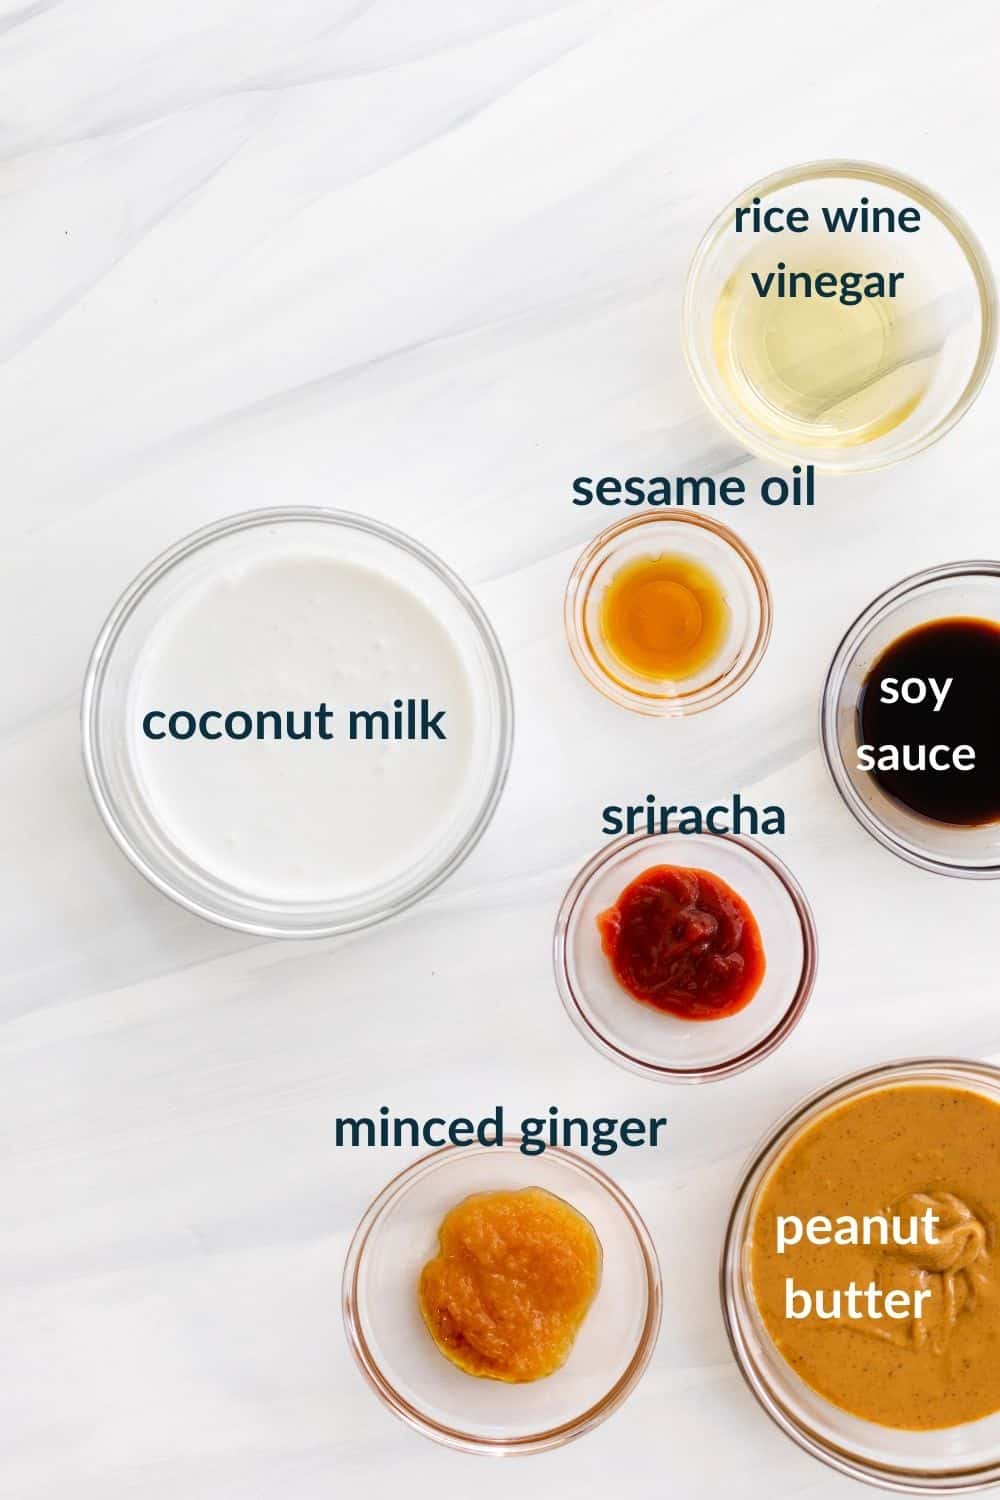 ingredients in bowls - coconut milk, minced ginger, peanut butter, sriracha, soy sauce, rice wine vinegar and sesame oil